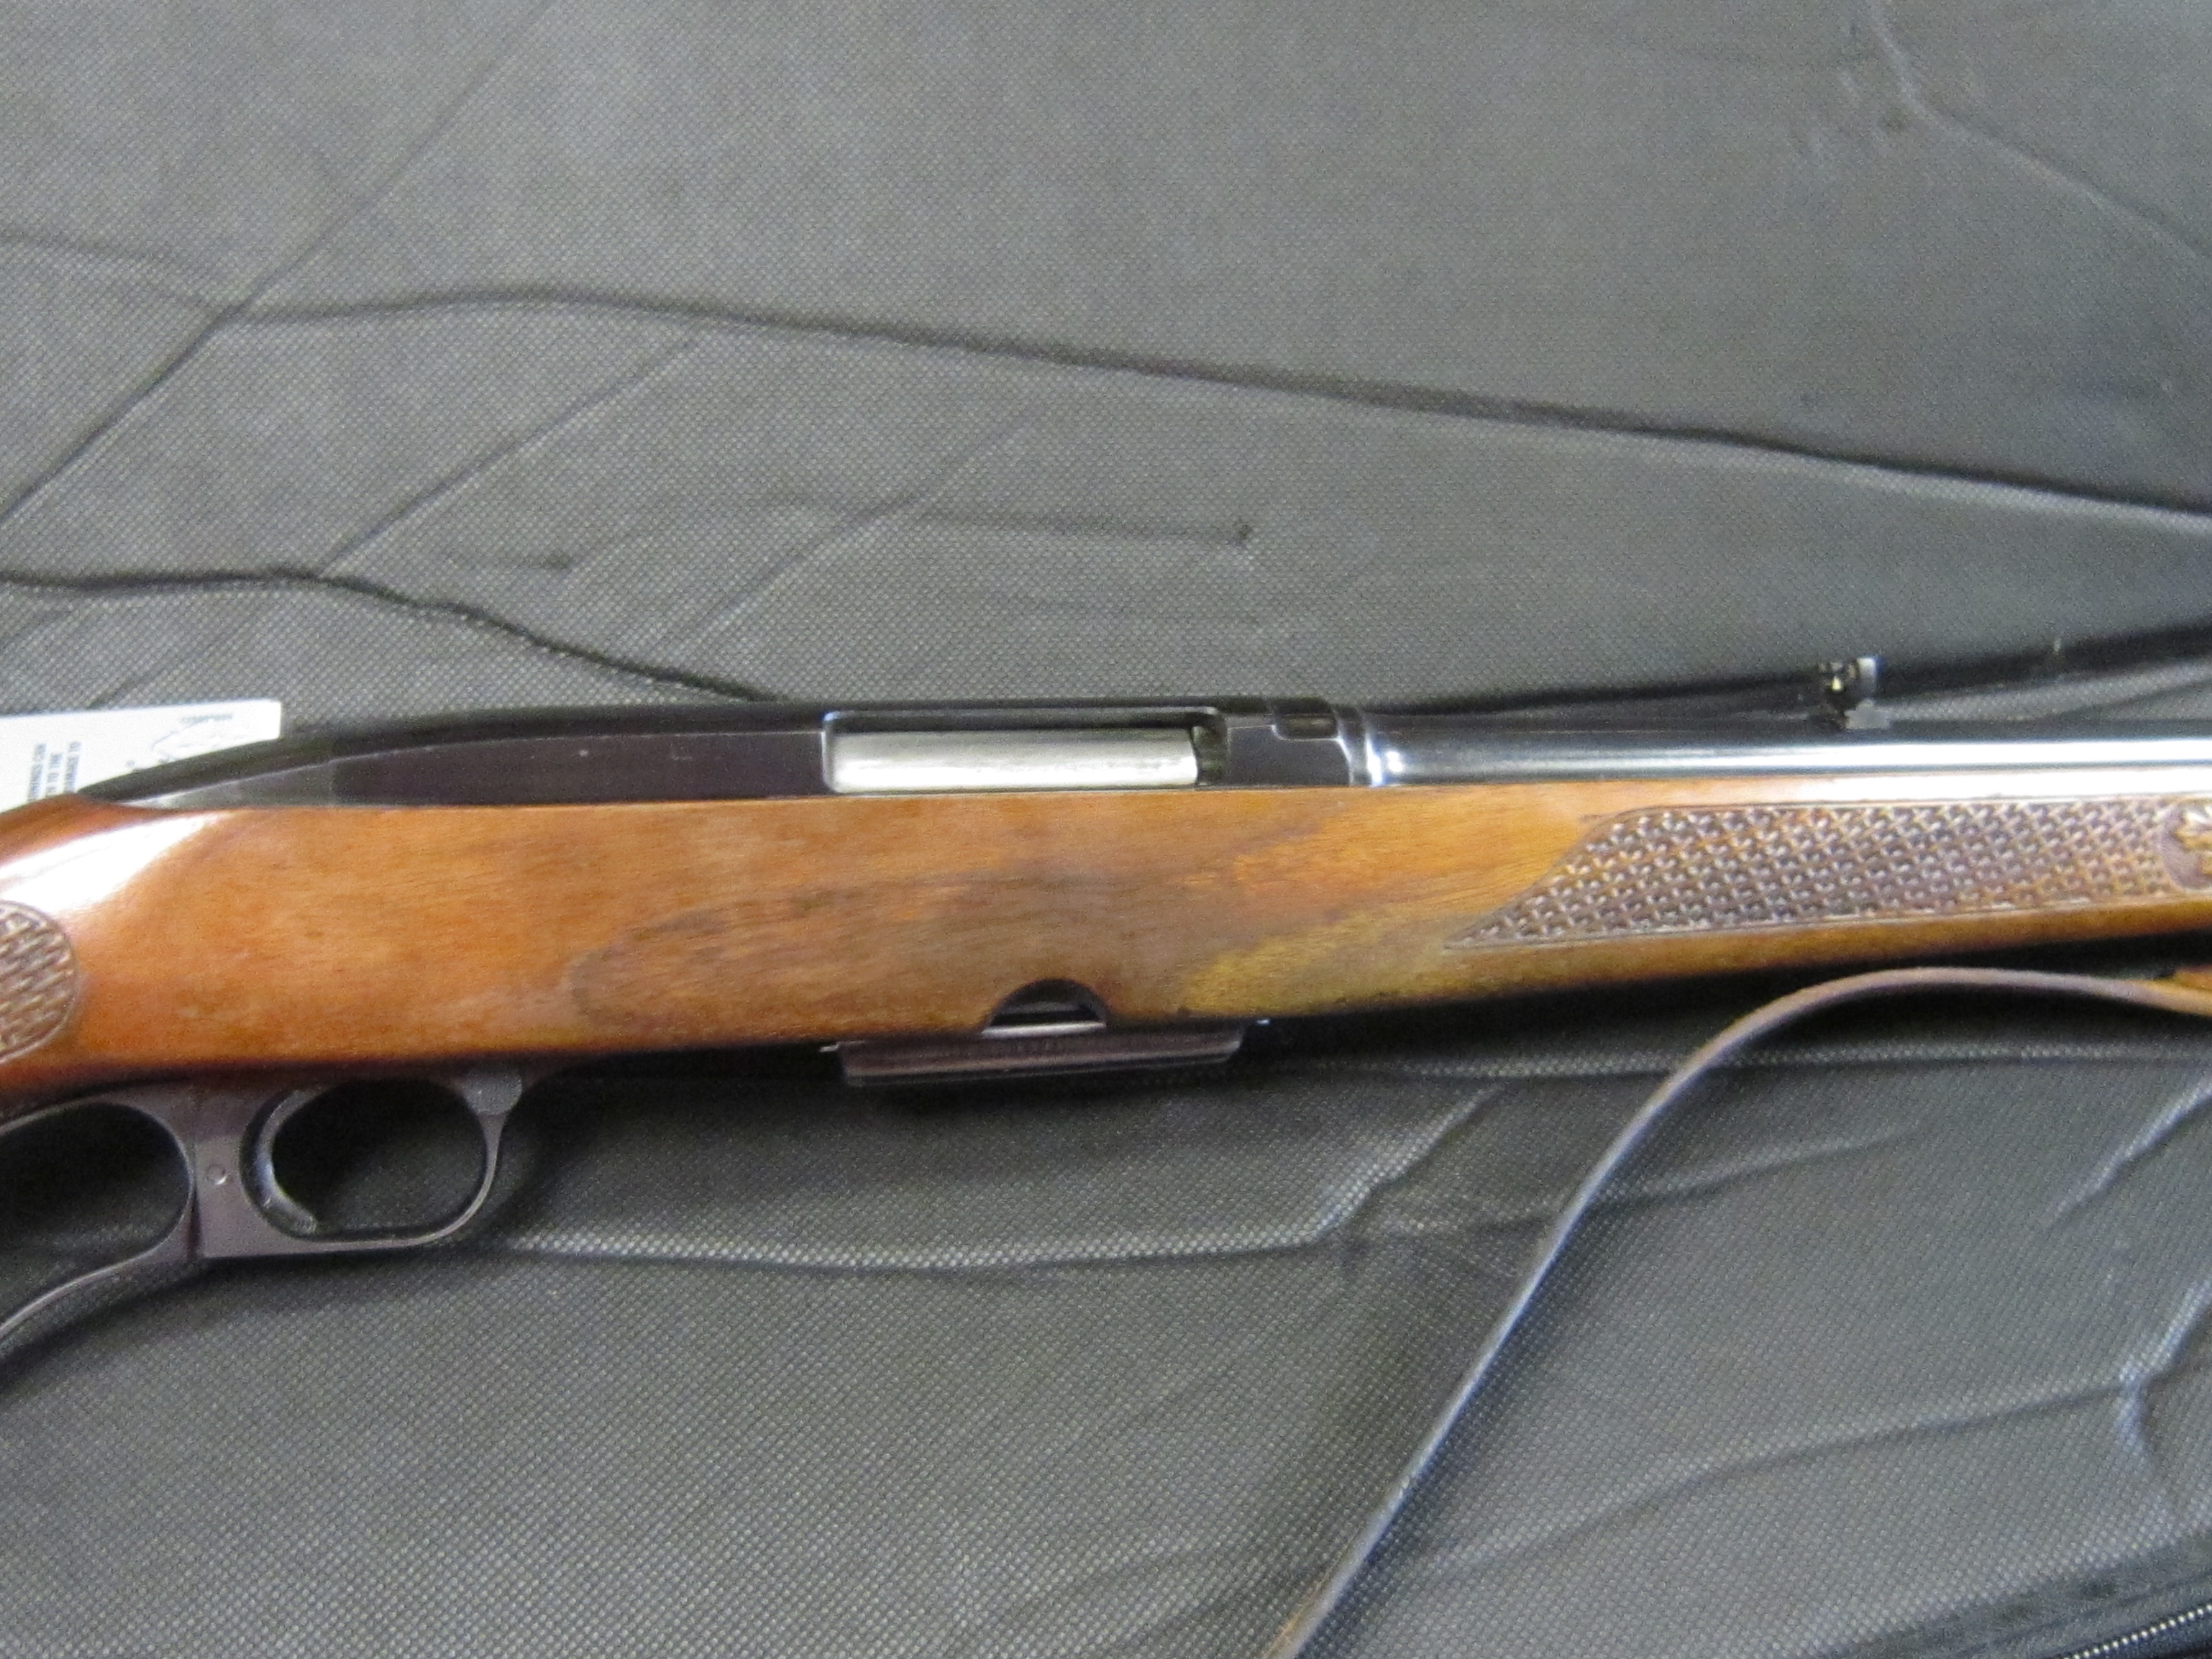 Winchester 88 - 243 for sale - 1970-71 - Beaver Sport and Pawn - Southern  Utah Guns, Ammo, Hunting and Fishing - Home